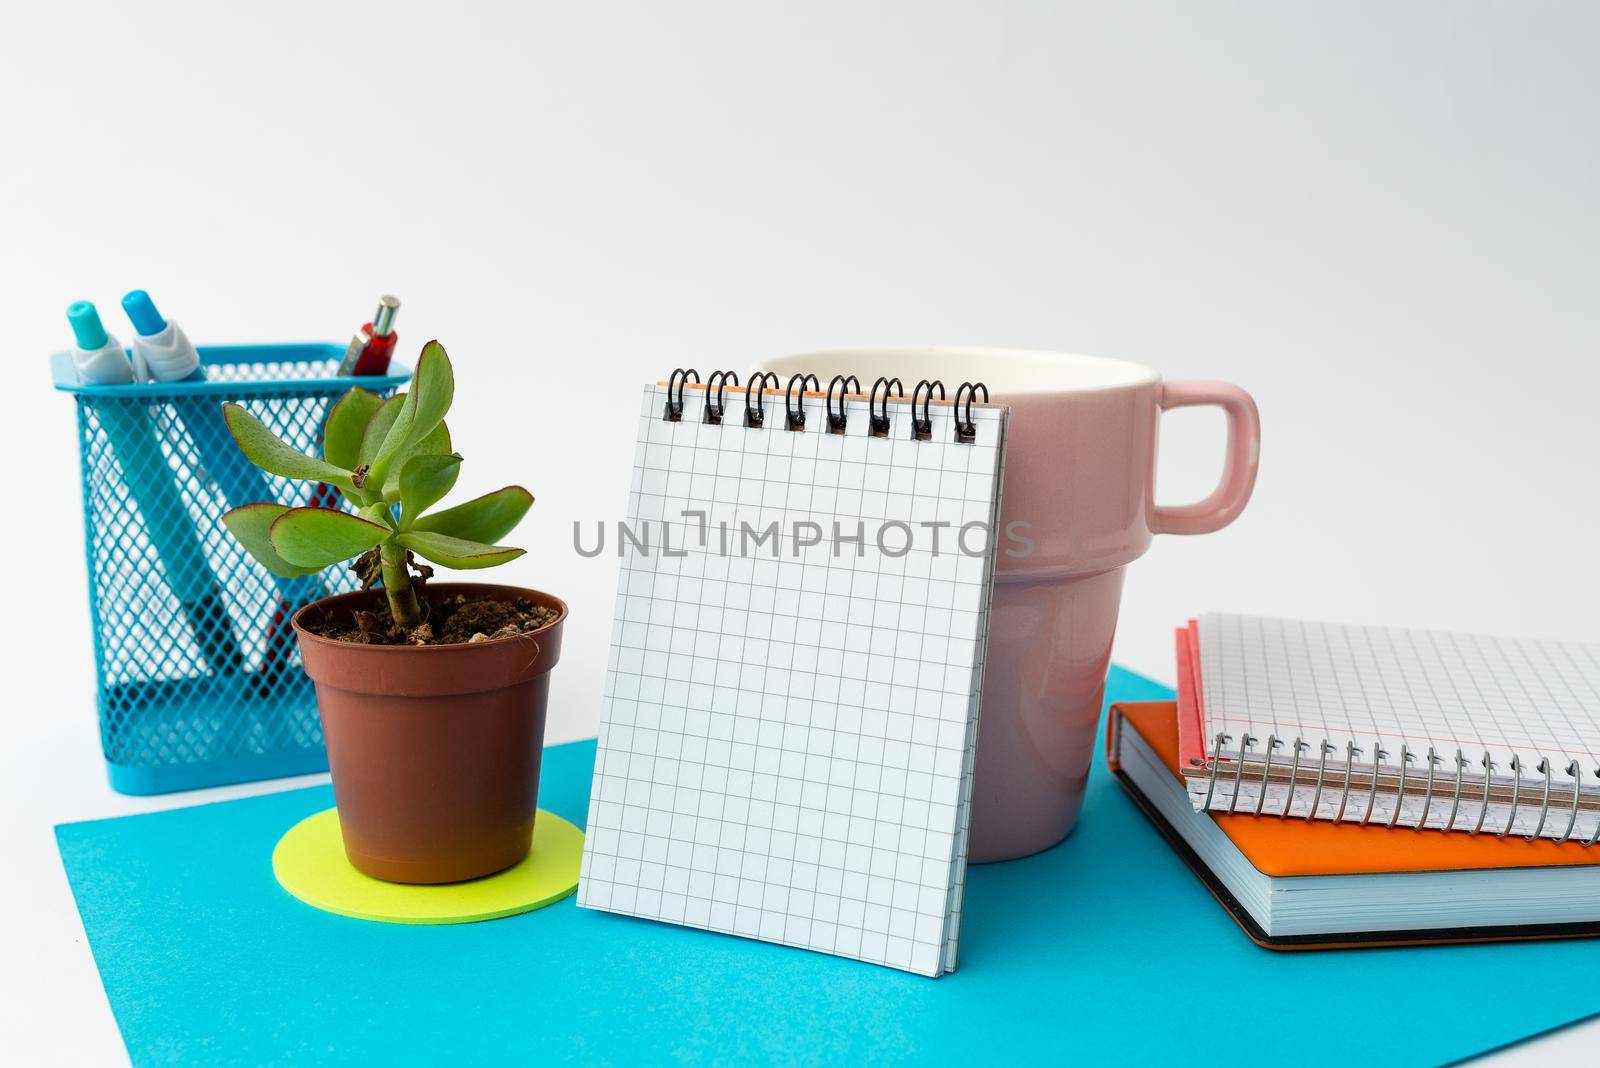 Tidy Workspace Setup, Writing Desk Tools Equipment, Smart Office Arrangement, Study Table, Taking Notes, Fresh Room Designs, Organized Tabletop, Time Management by nialowwa